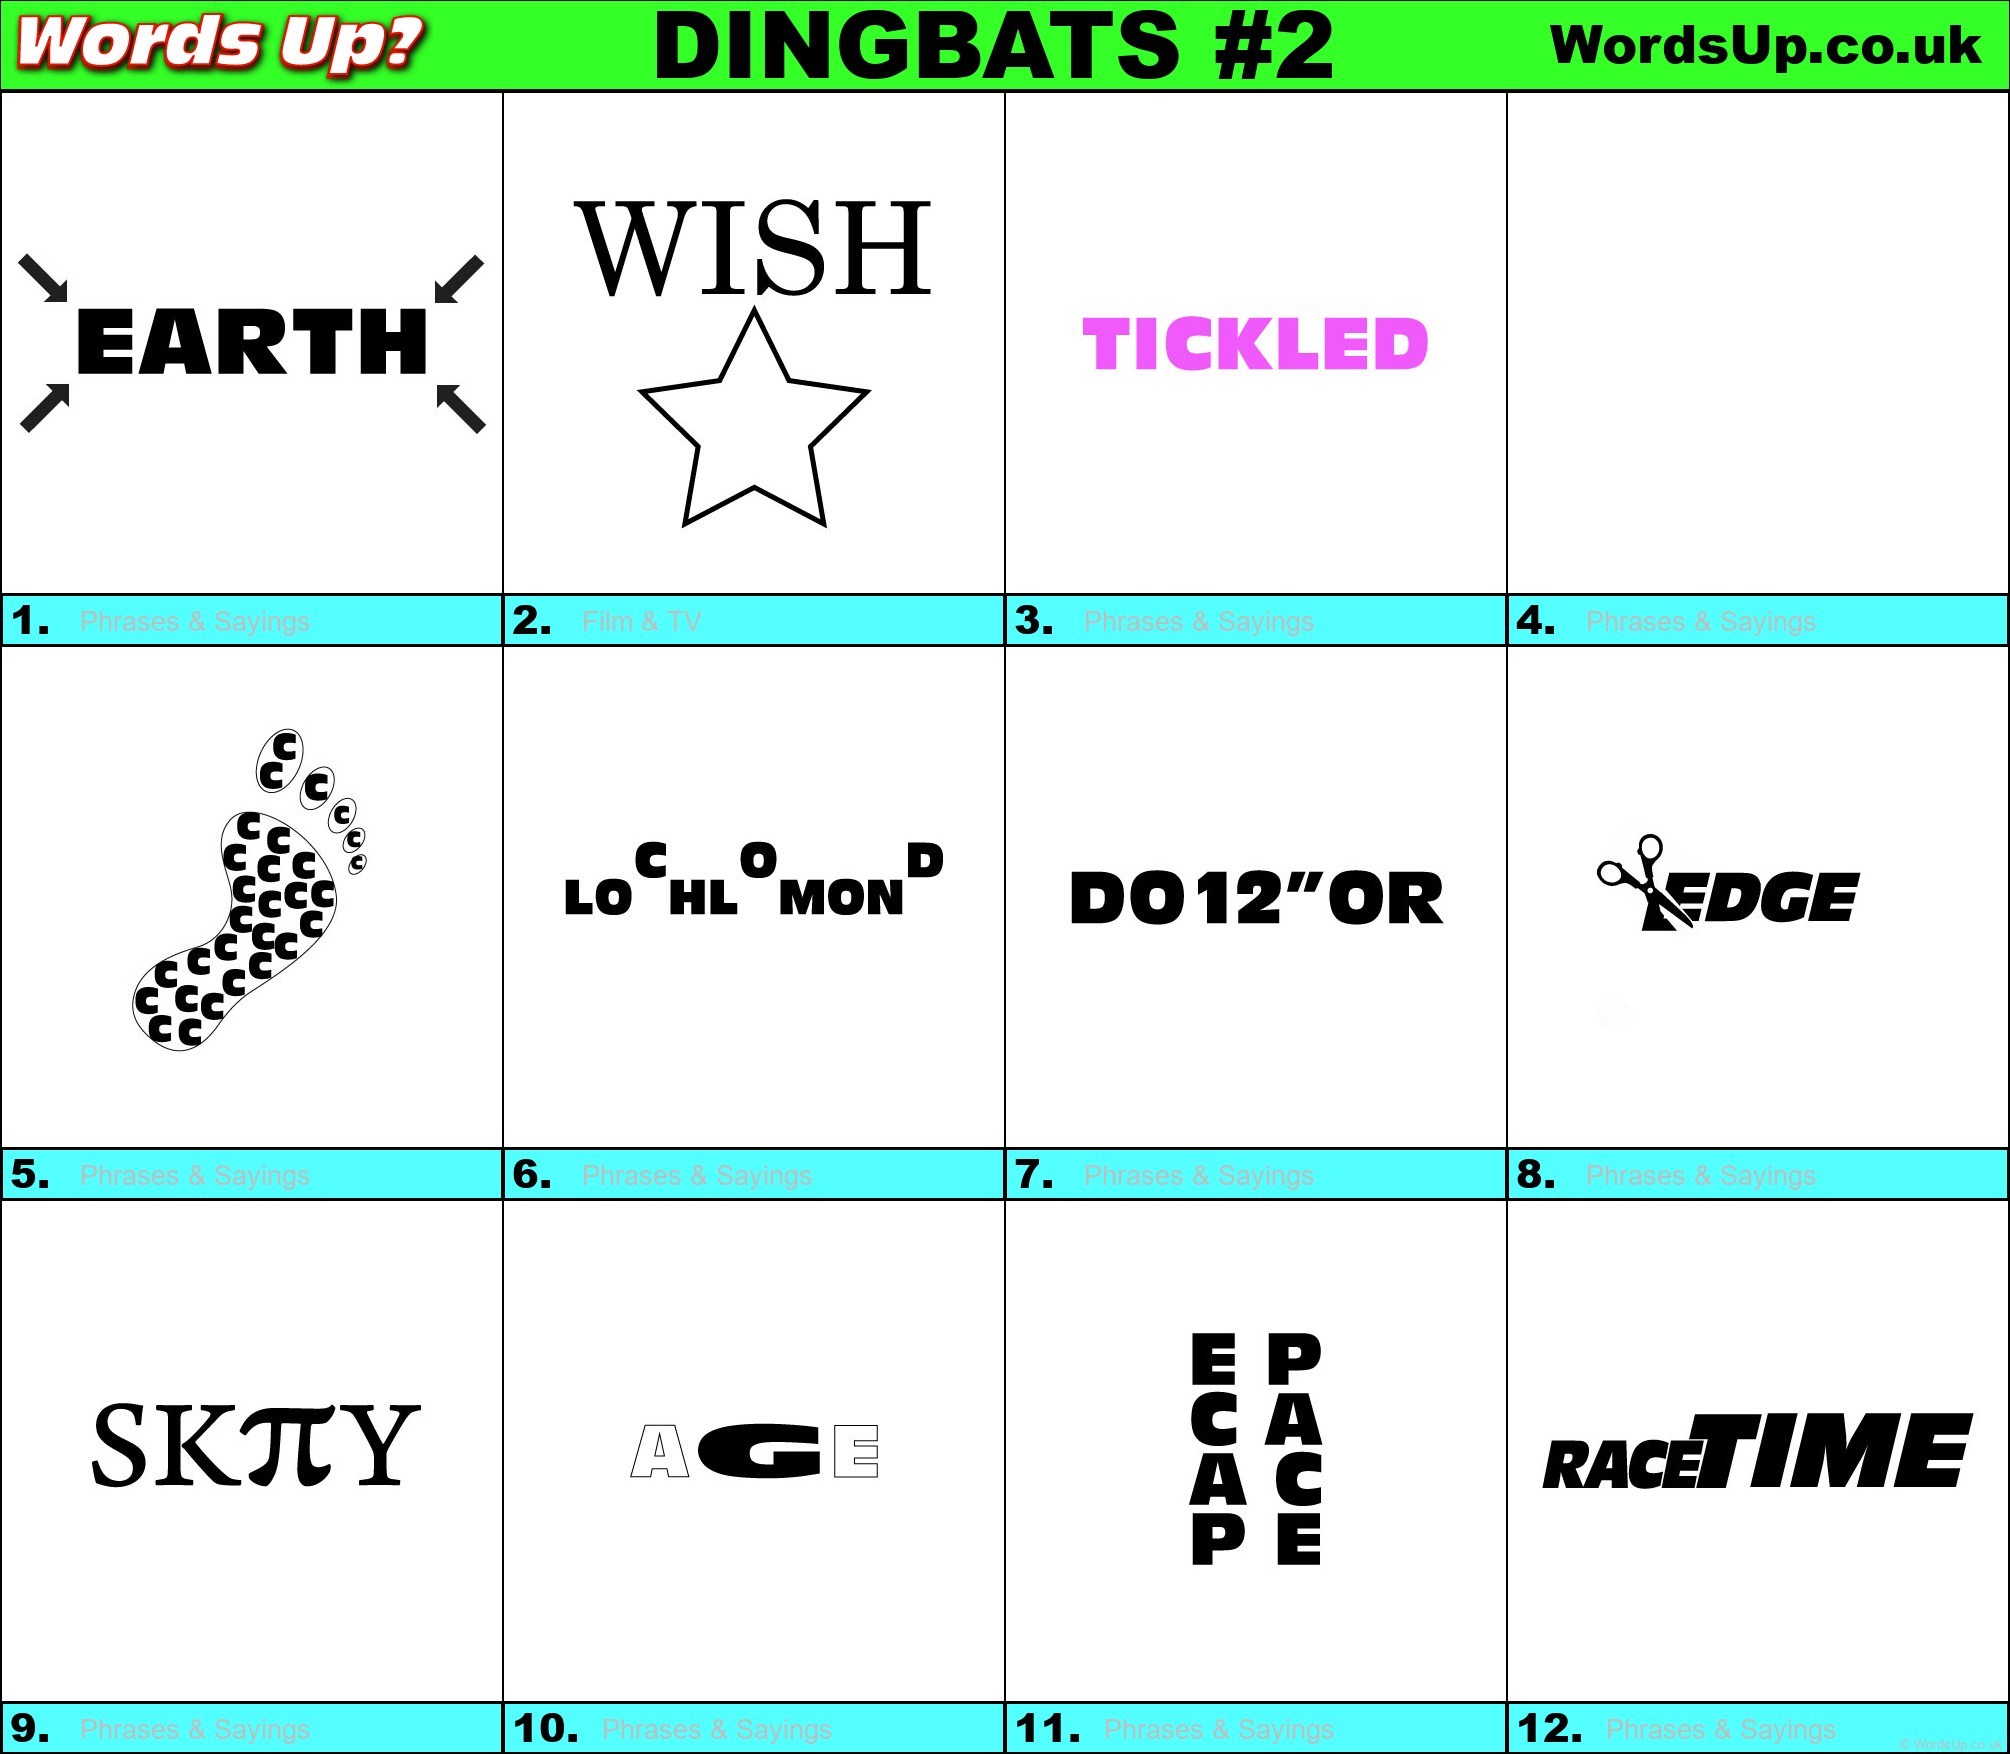 Dingbats Quiz 2 Find The Answers To Over 730 Dingbats Words Up Games